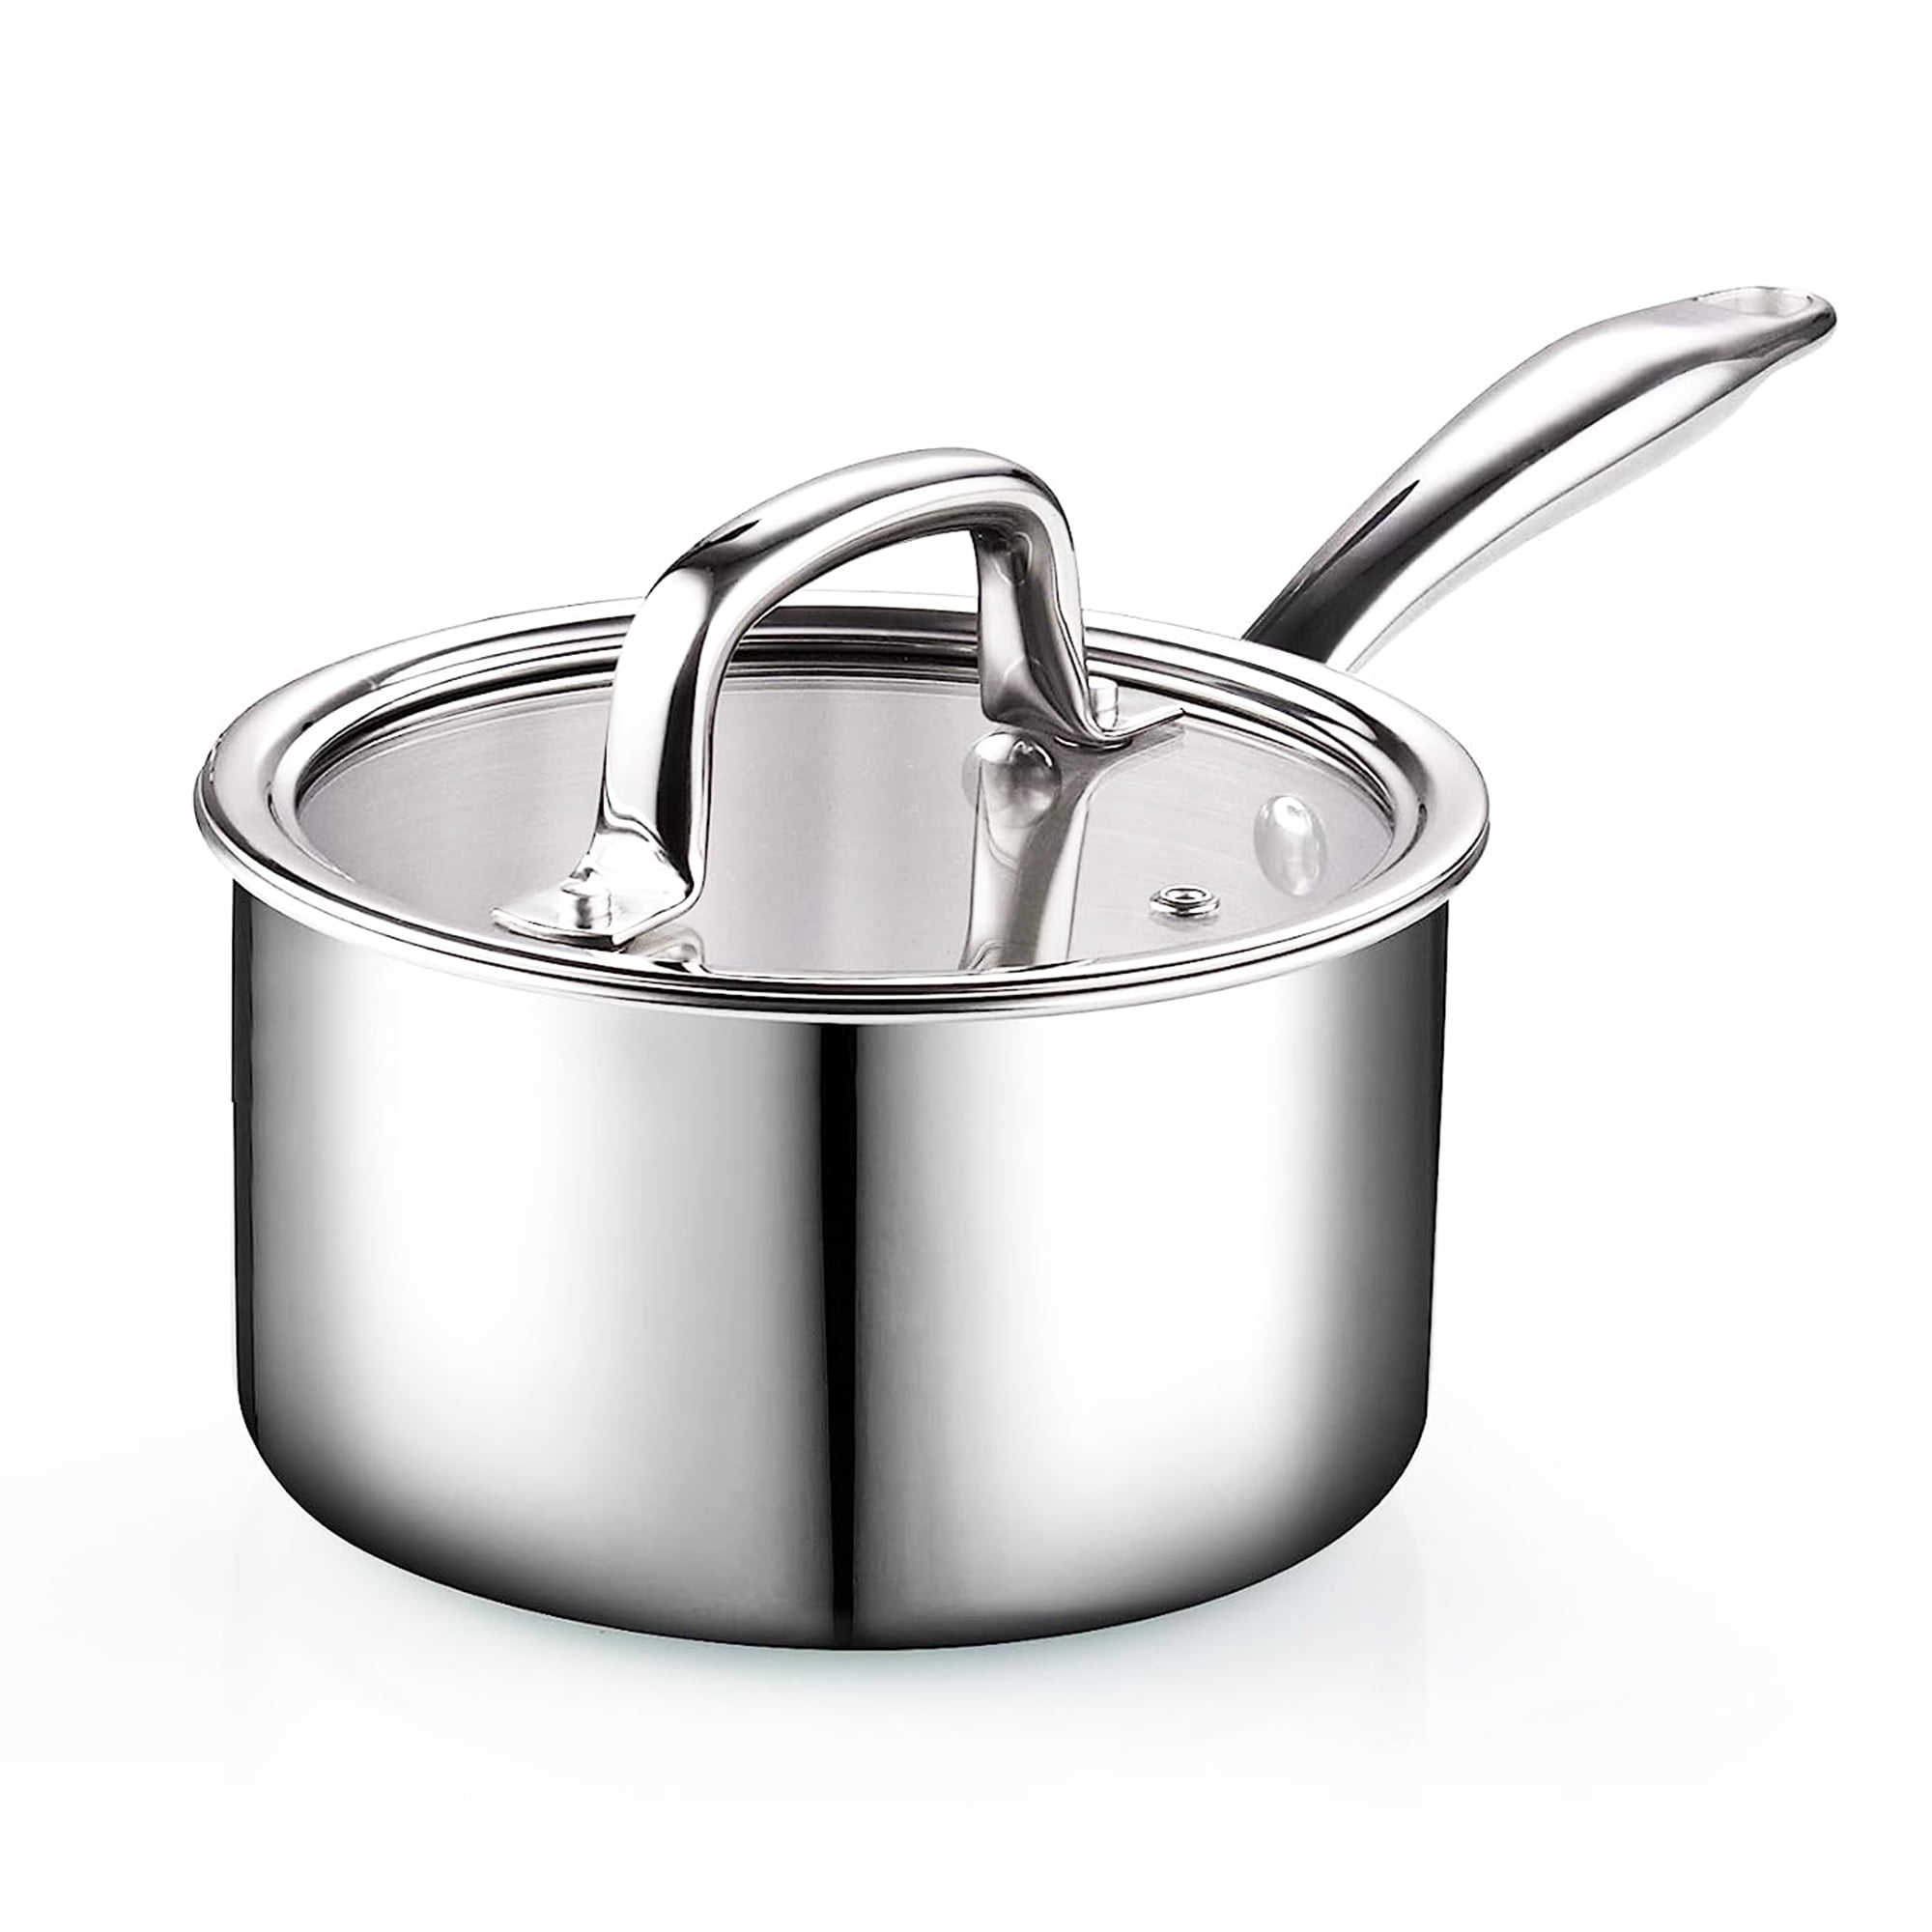 Cook N Home 2679 Tri-Ply Clad Stainless Steel Sauce Pan with Lid, 1.5 Quart, Silver